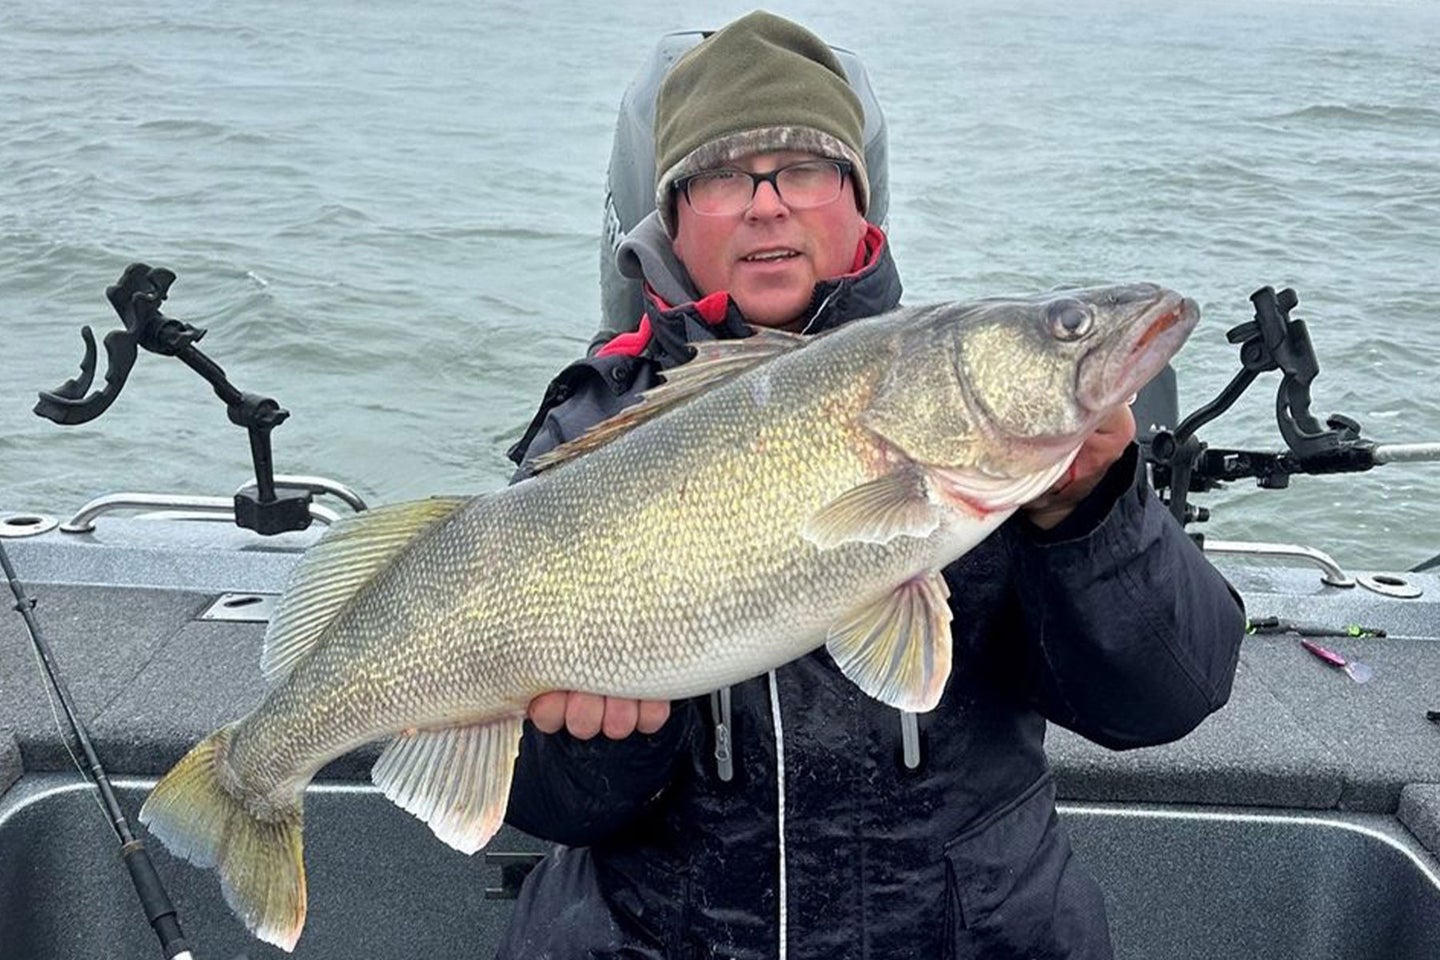 An angler poses with a state-record walleye in a fishing boat.